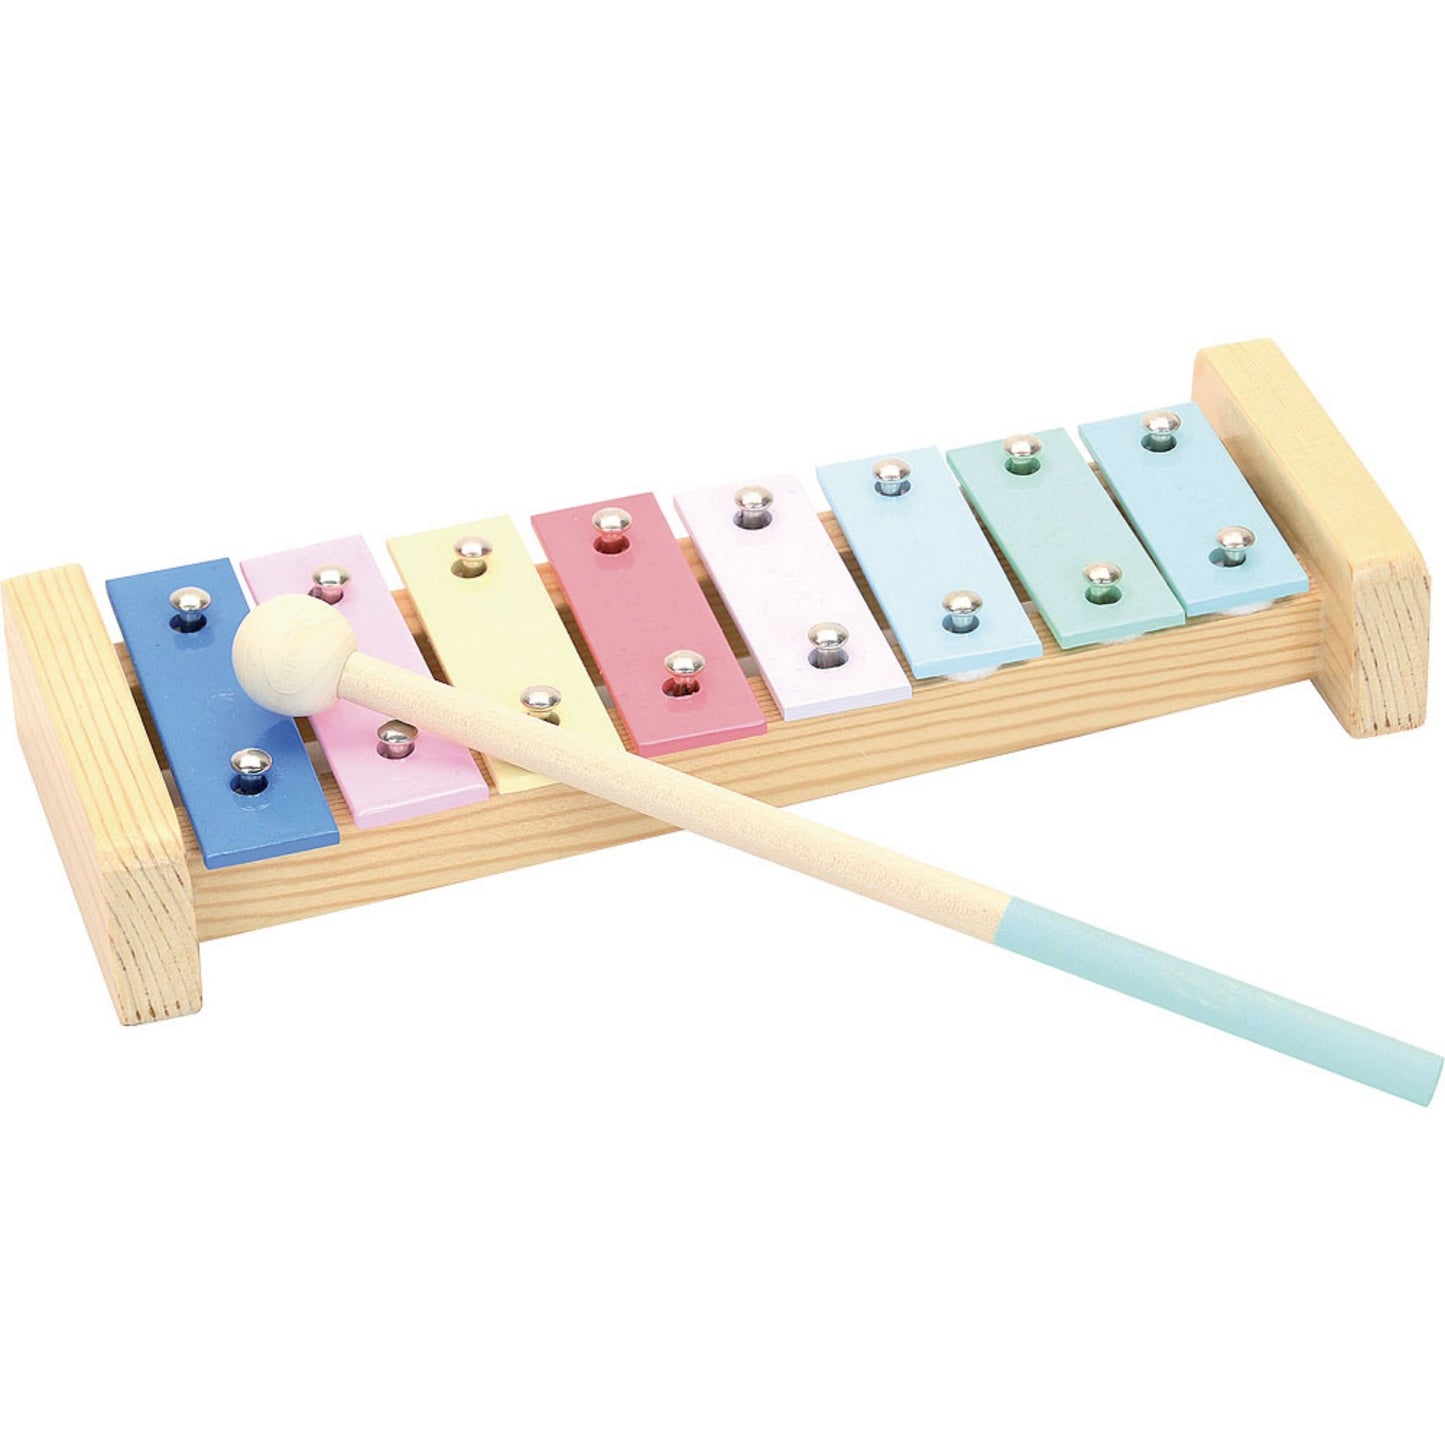 Vilac Musical Instruments Set Designed by Michelle Carlslund | Musical Toy | Wooden Toddler Activity Toy | Metallophone | BeoVERDE.ie